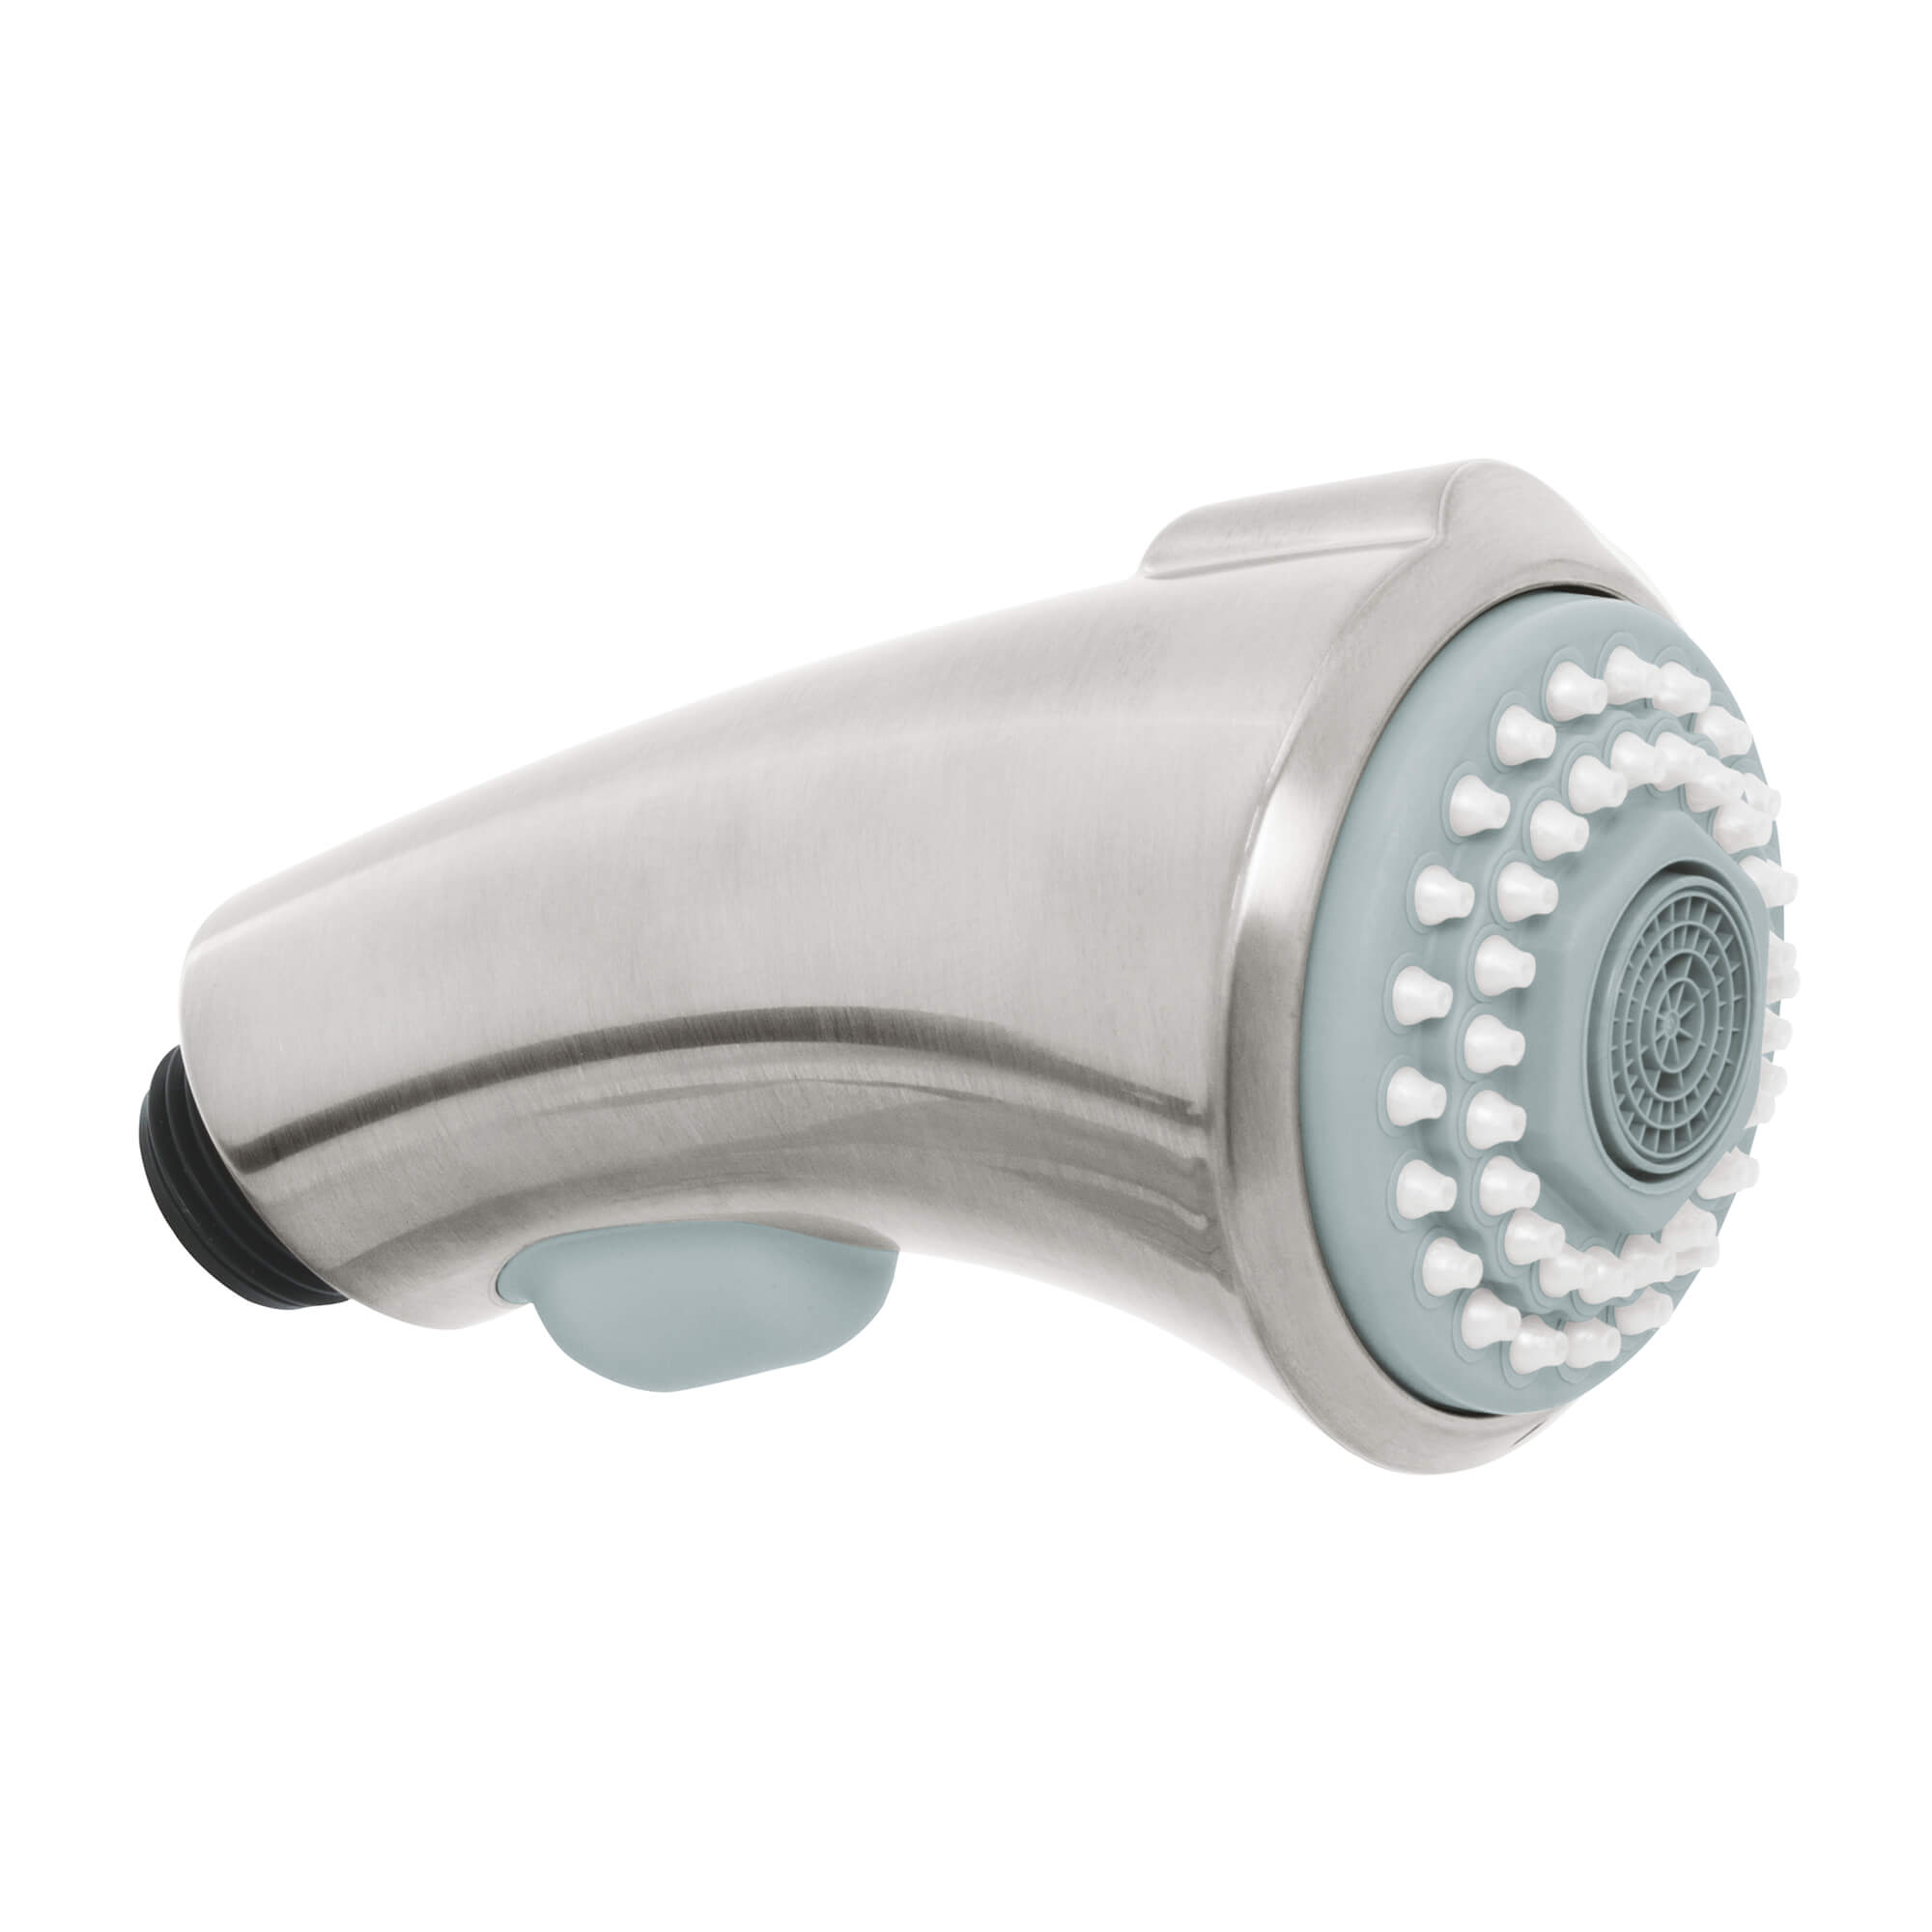 Grohe Ladylux Spray Head - Captions Tempo Grohe Ladylux Cafe Replacement Spray Head